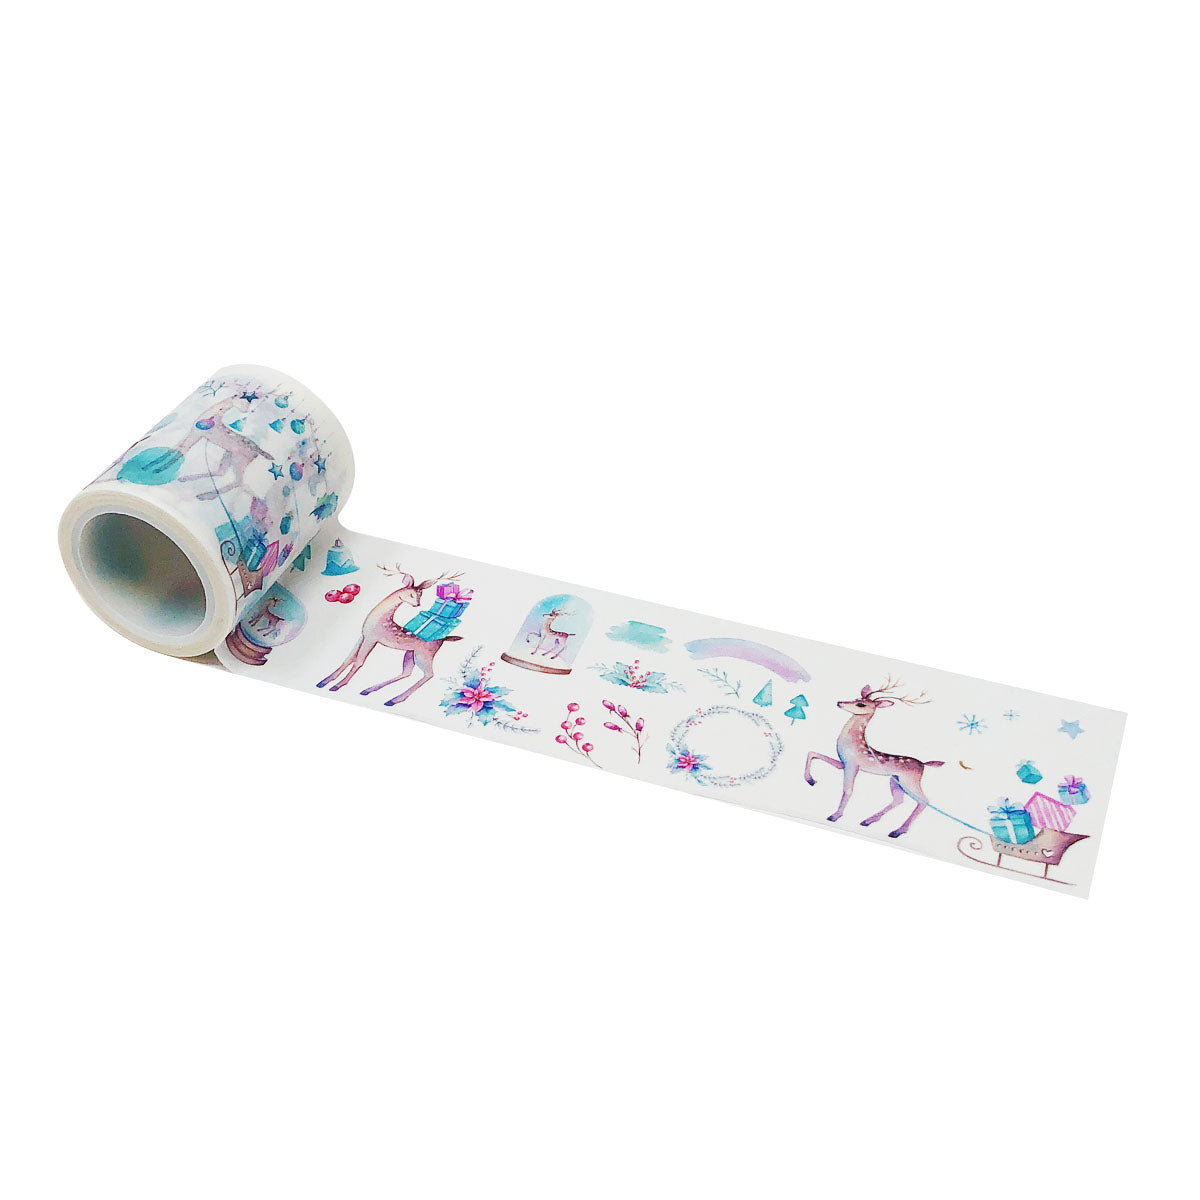 Wrapables Decorative Festive 30mm x 5M Wide Washi Masking Tape, Christmas Quotes